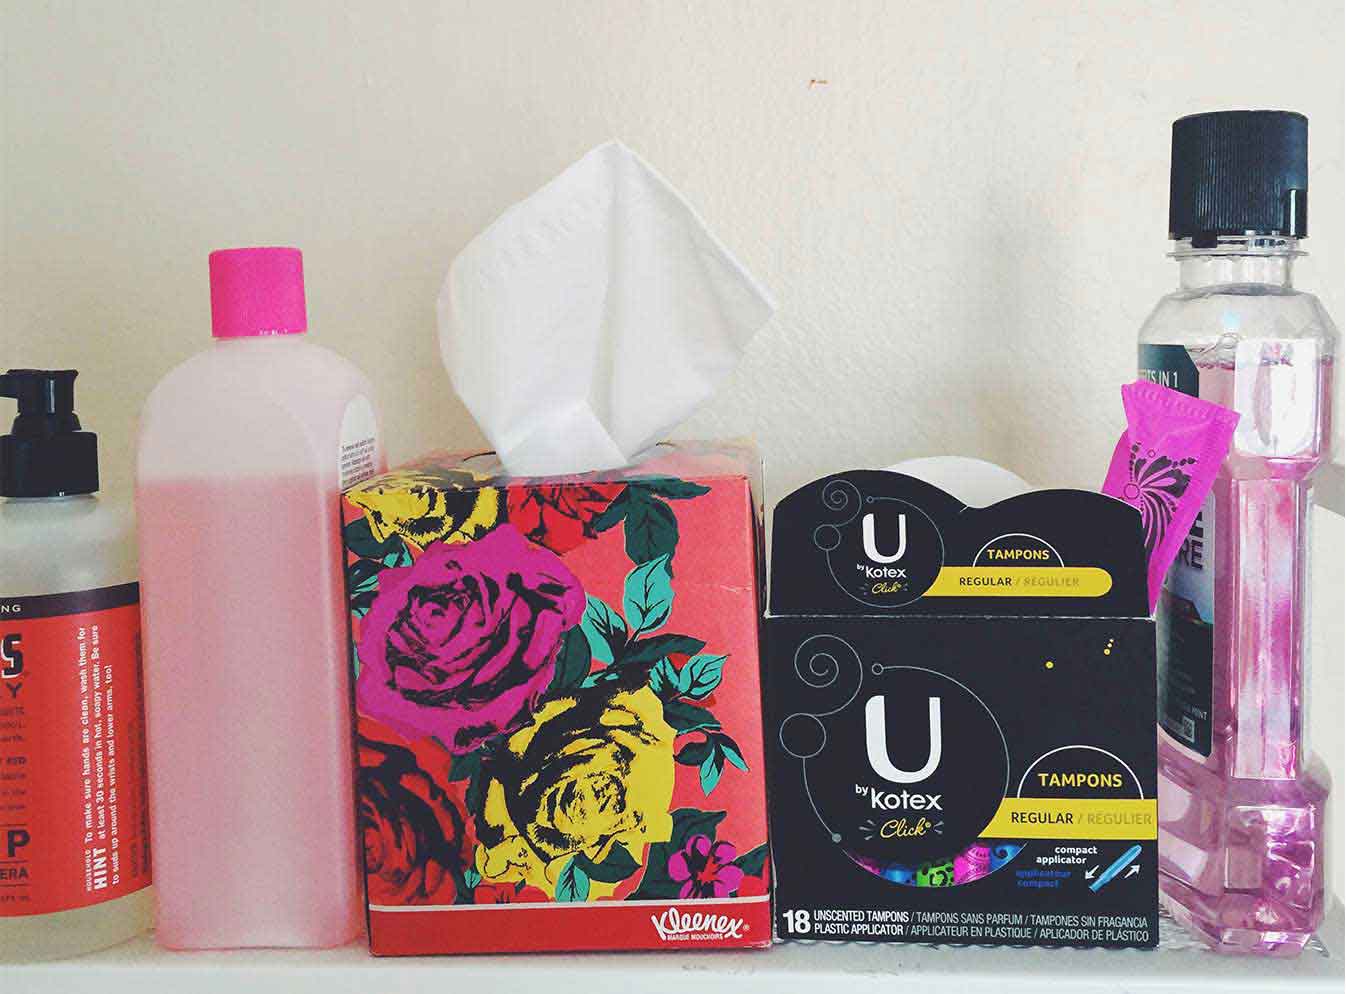 Tissues, bottles, box of tampons